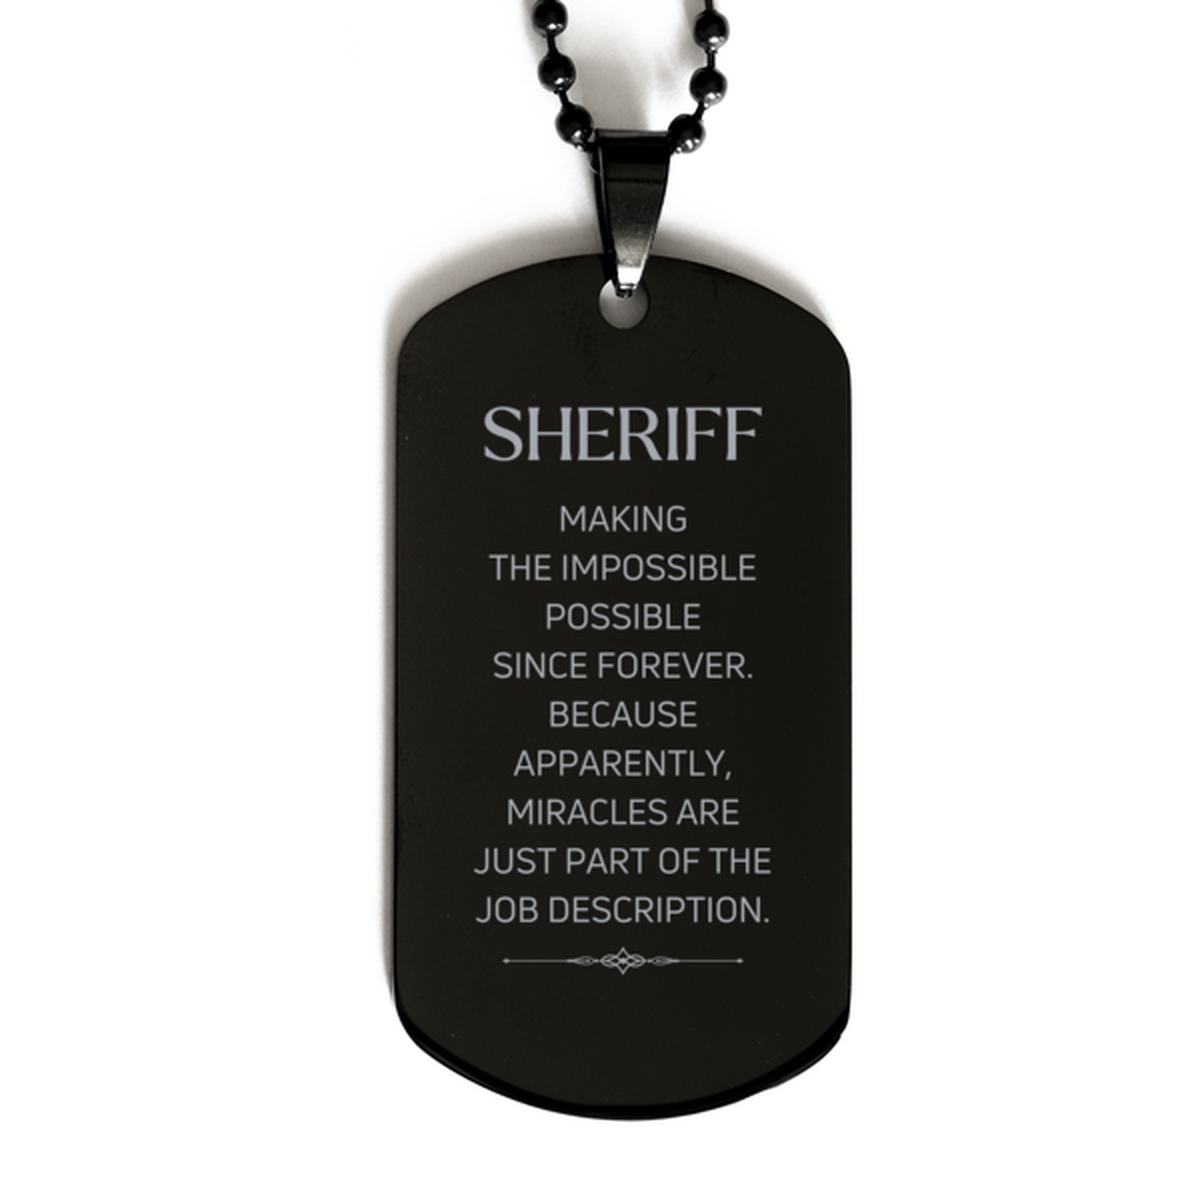 Funny Sheriff Gifts, Miracles are just part of the job description, Inspirational Birthday Black Dog Tag For Sheriff, Men, Women, Coworkers, Friends, Boss